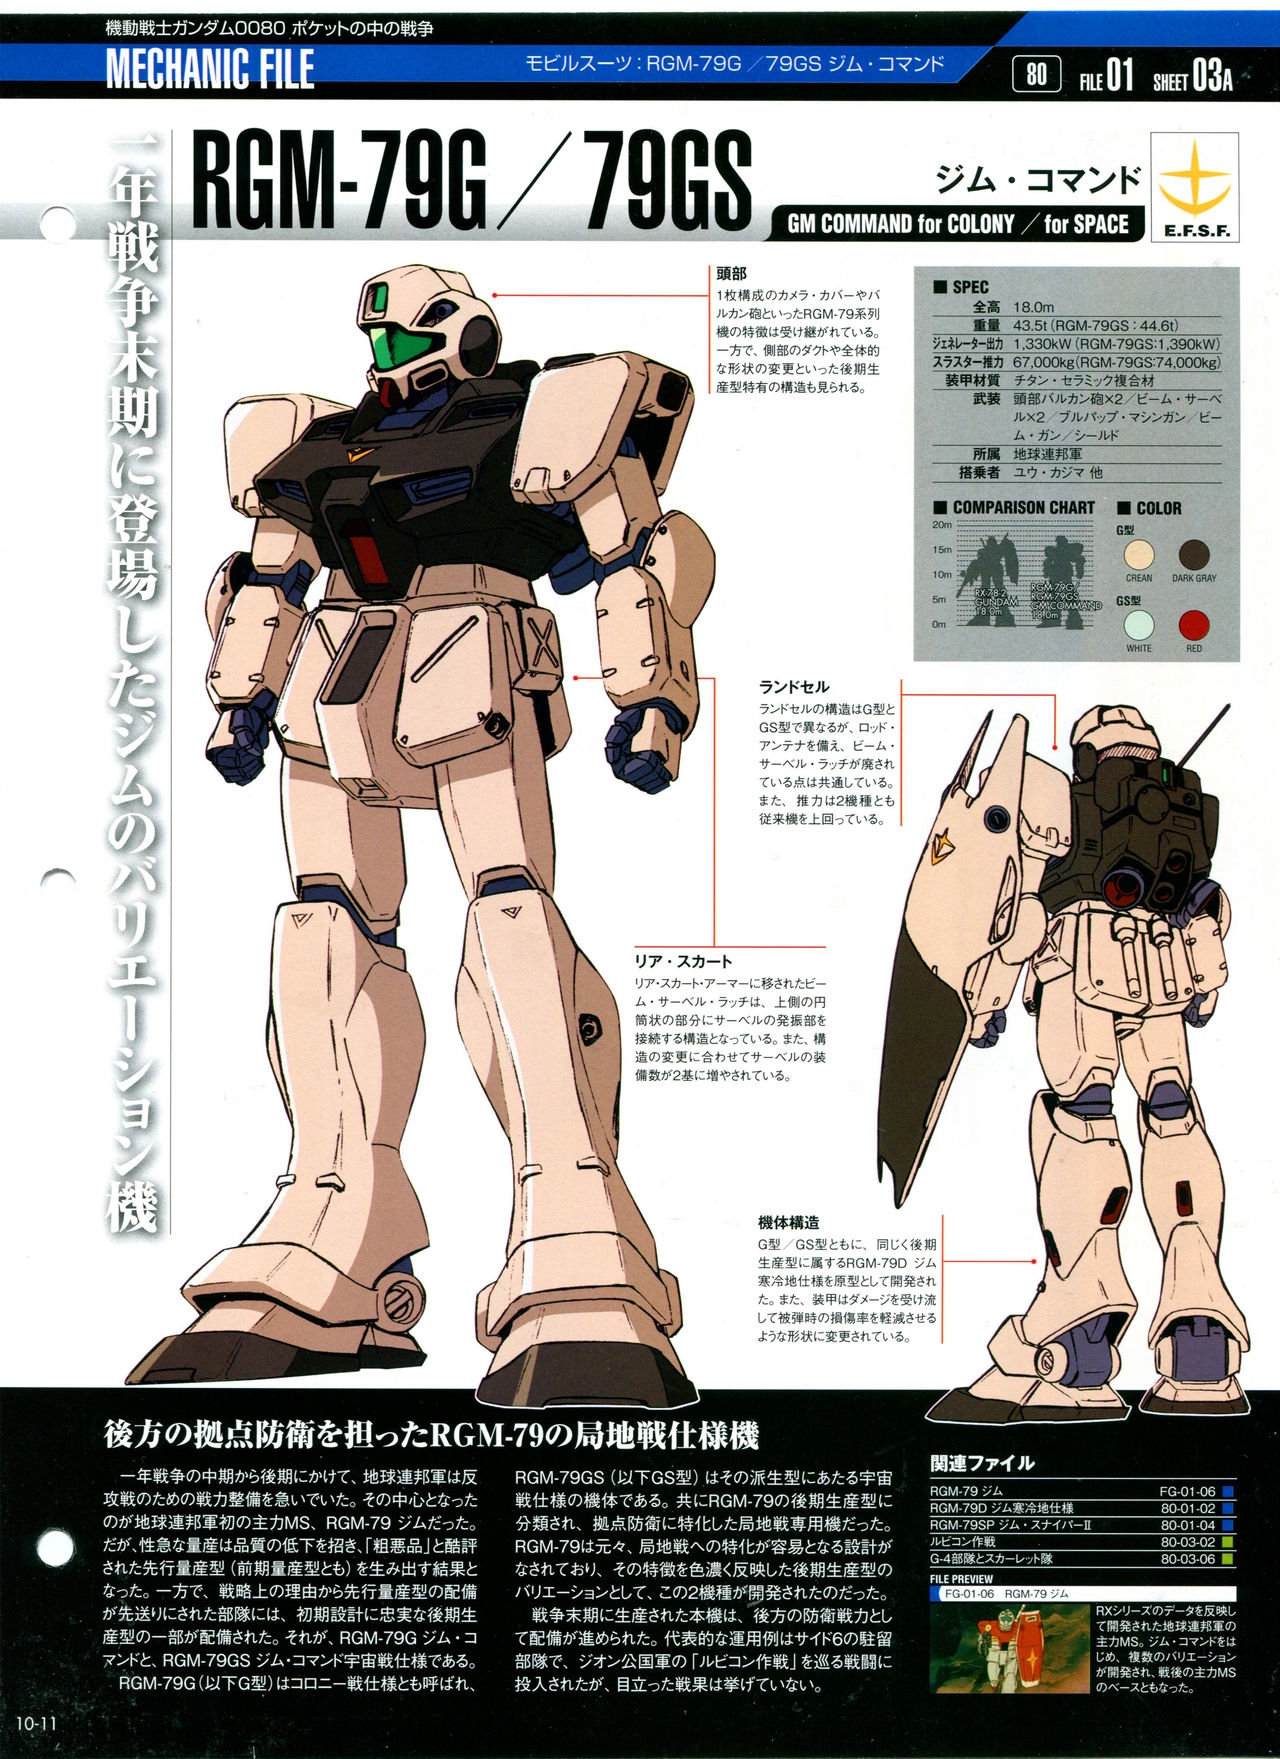 The Official Gundam Perfect File - No. 010 14